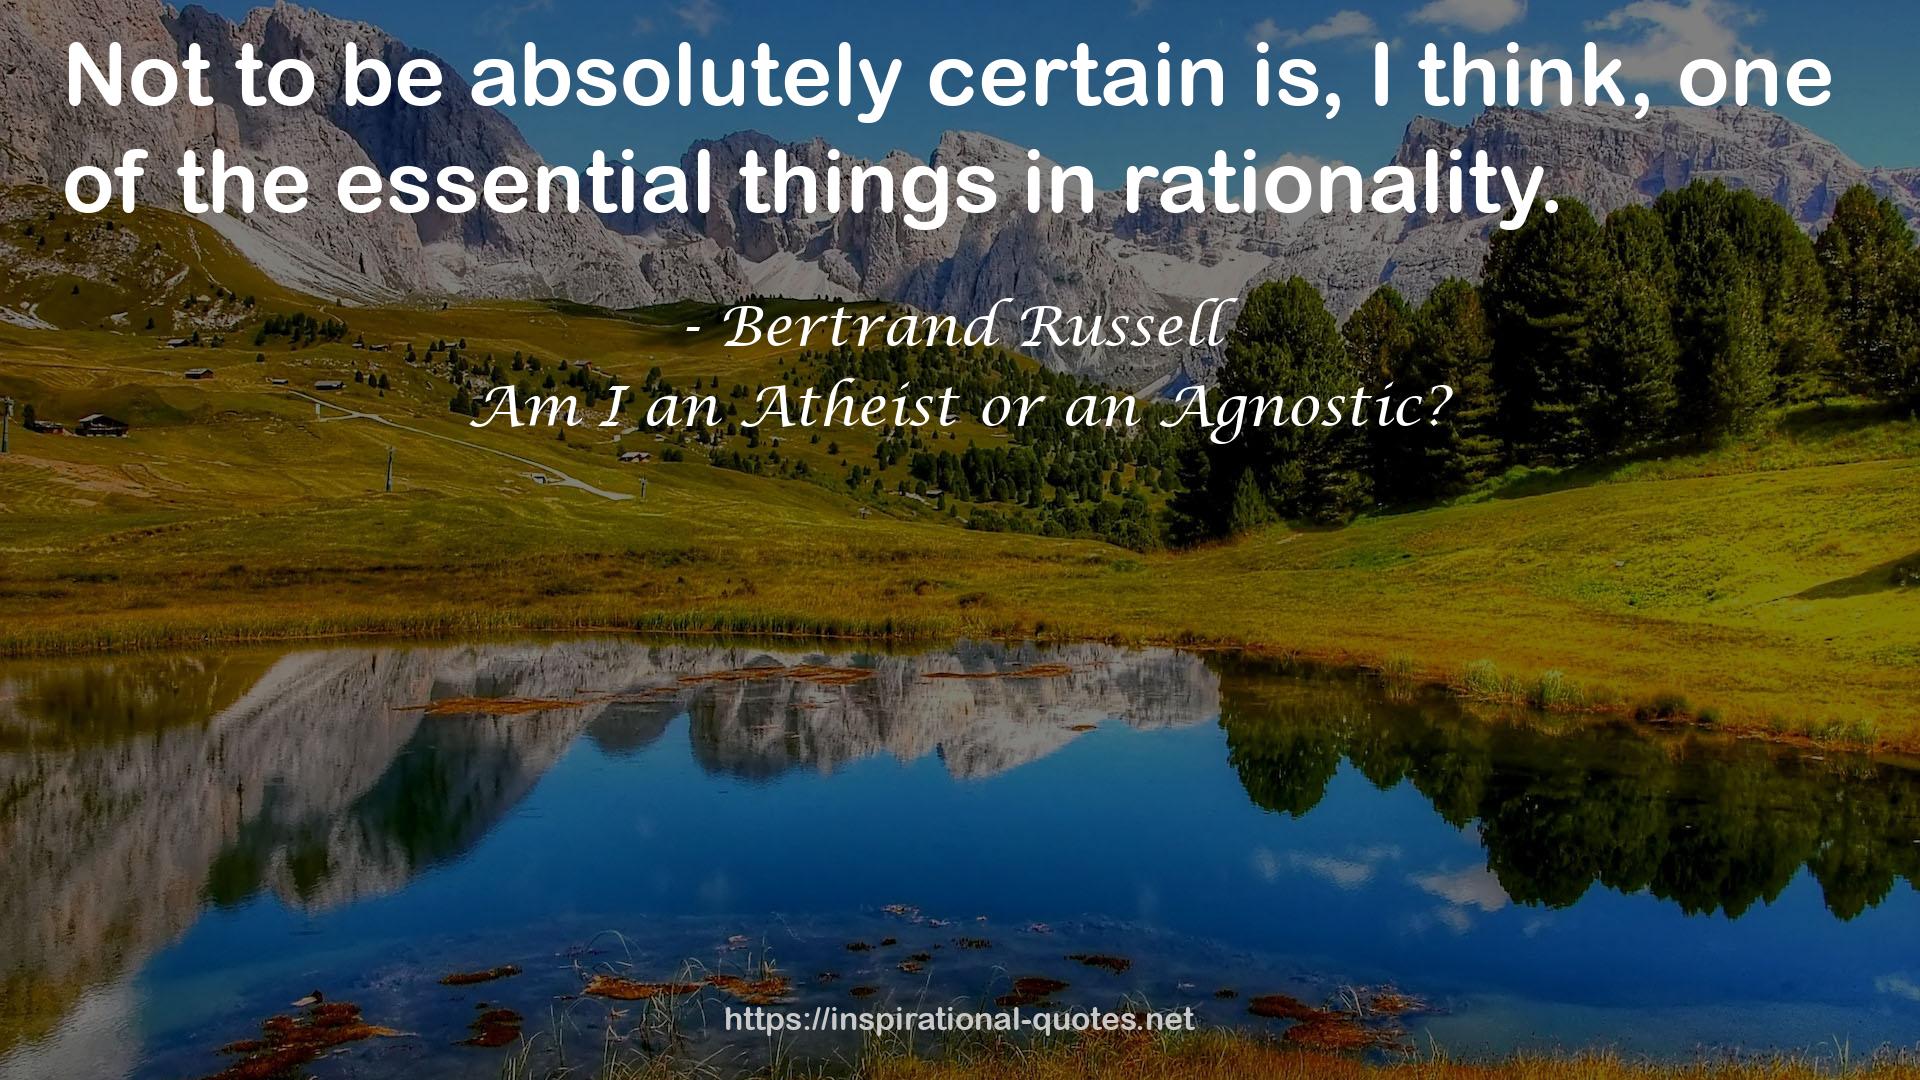 Am I an Atheist or an Agnostic? QUOTES